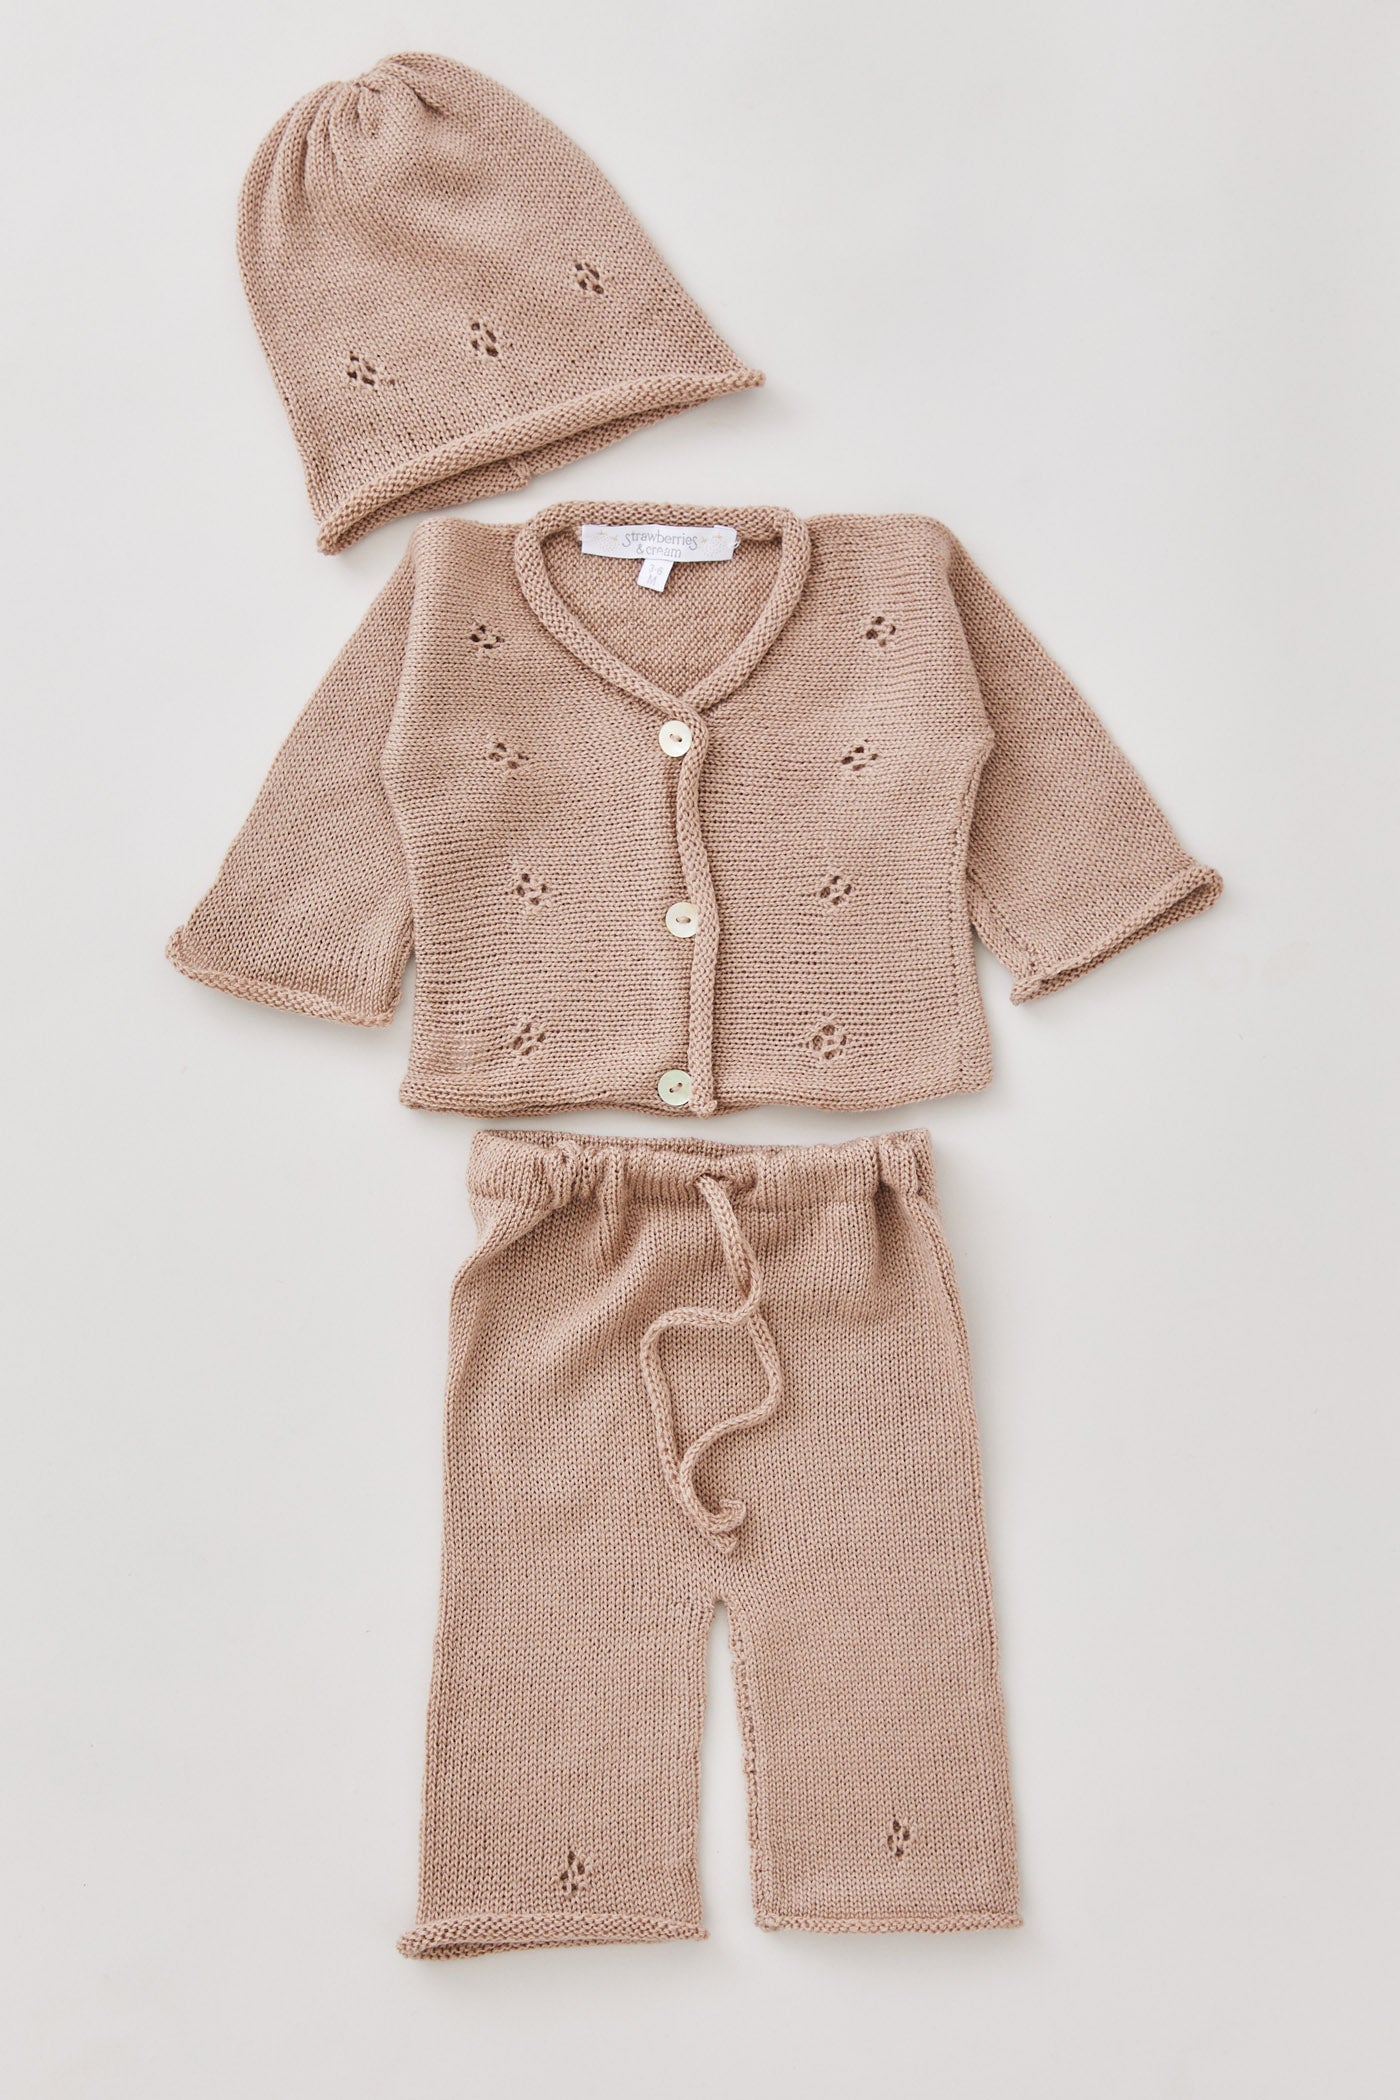 Merino Cardigan and Hat Set With Leggings in Taupe - Designed by Ingrid Lewis - Strawberries & Cream